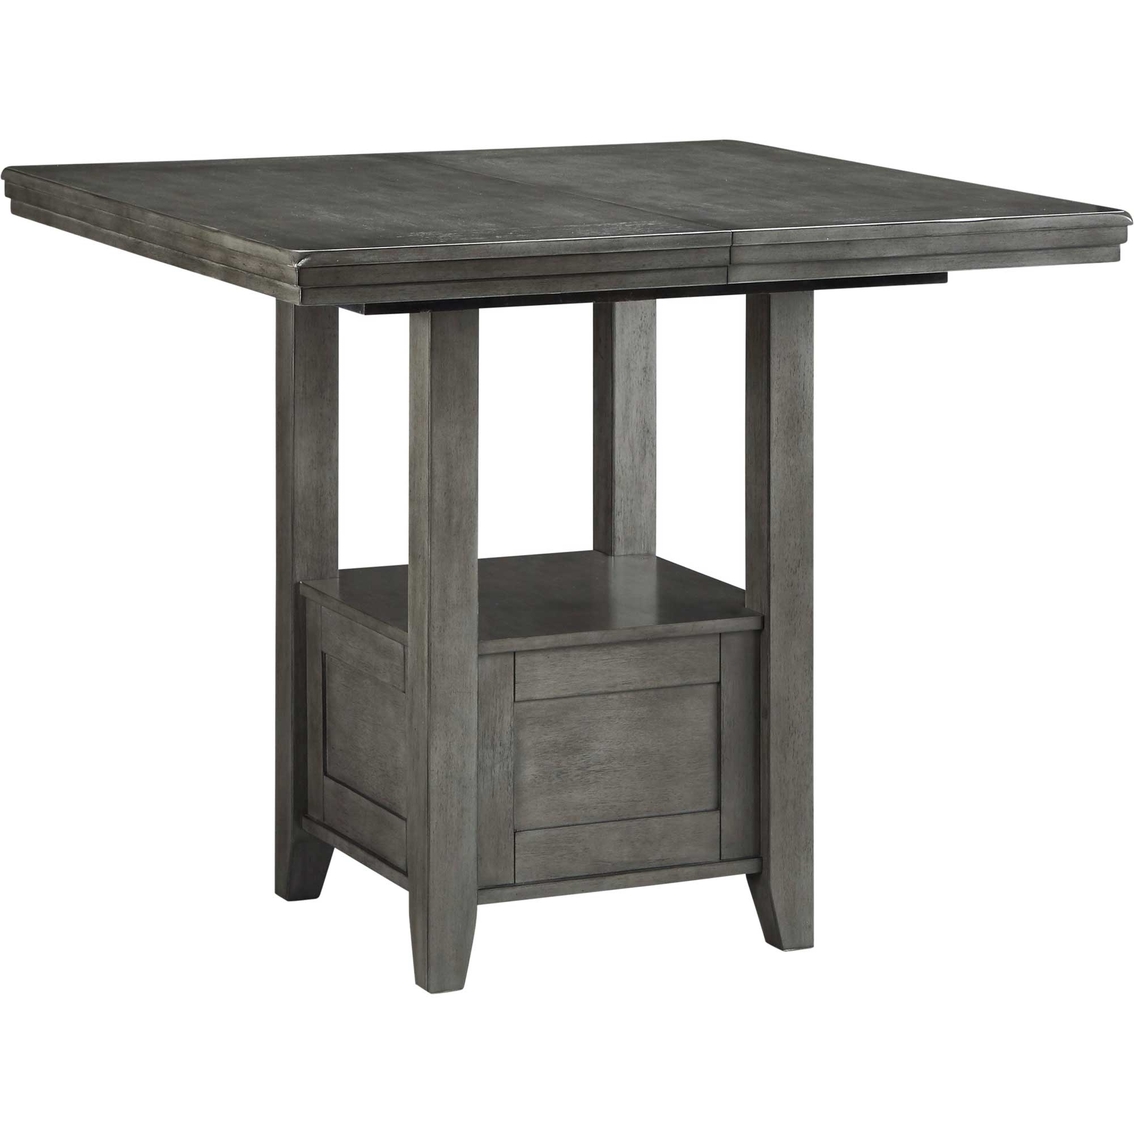 Signature Design by Ashley Hallanden 7 pc. Counter Dining Set - Image 3 of 7